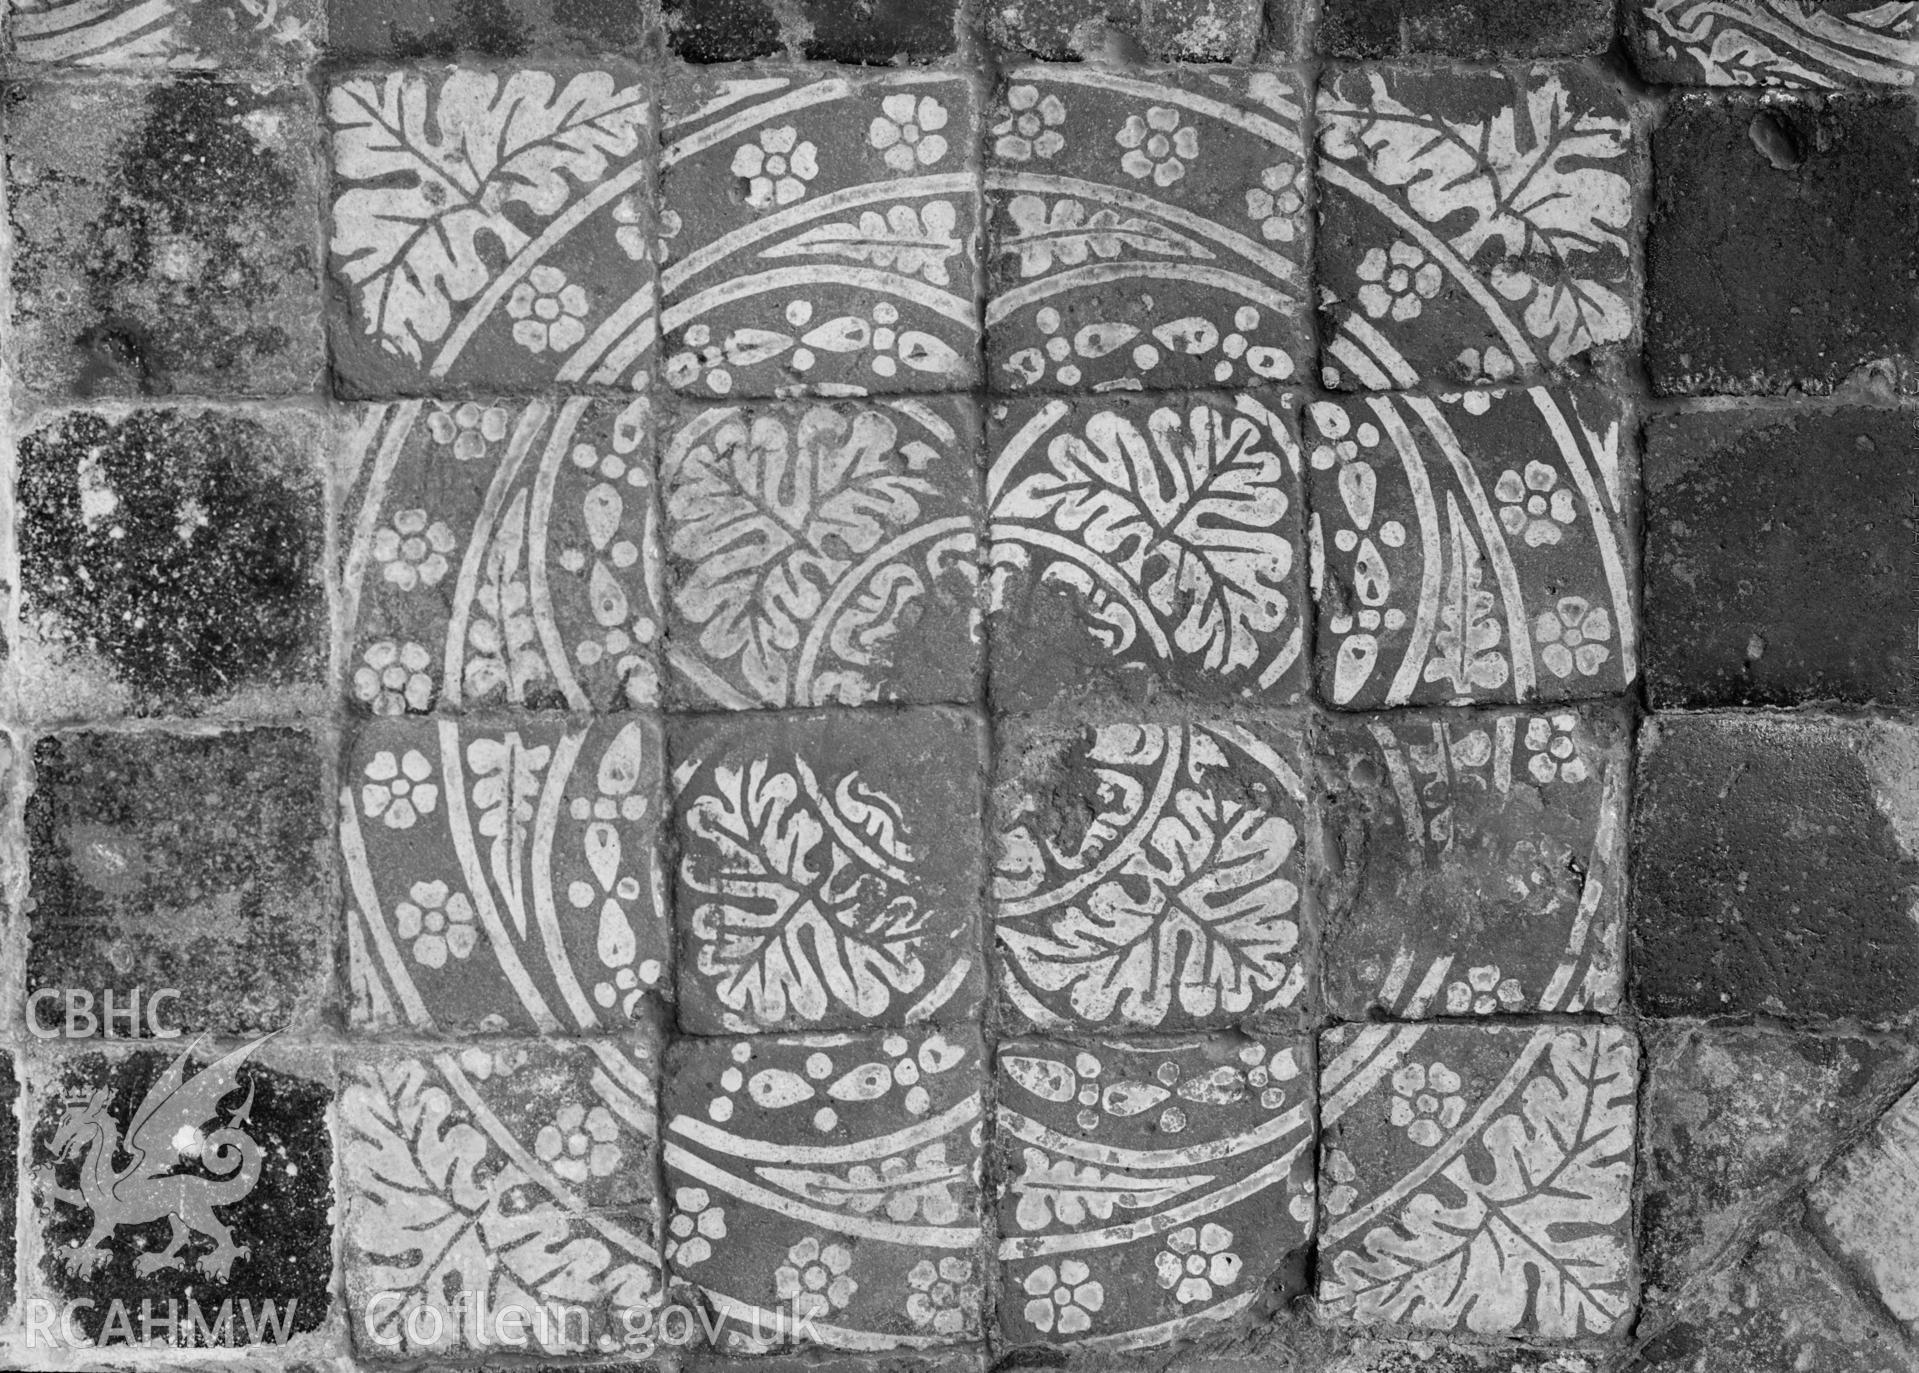 View of floor tile from St Davids Cathedral, Pembrokeshire, taken by Clayton pre-1950.